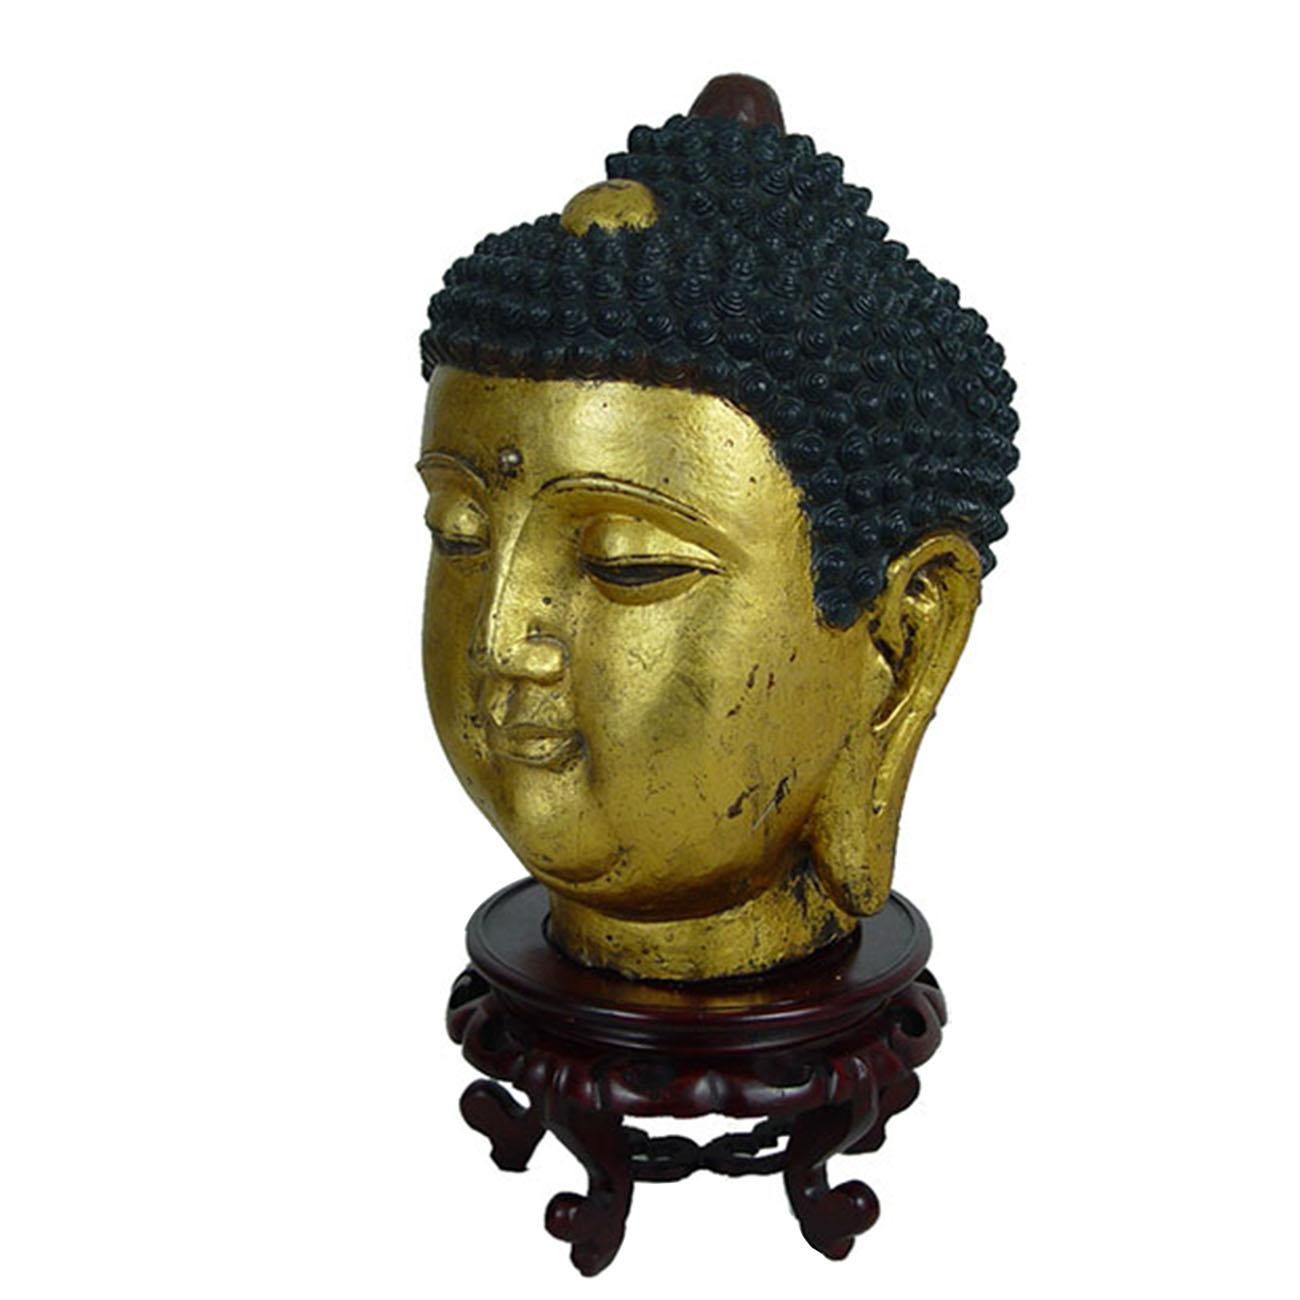 This is a Chinese antique gilt metal buddha head from Shan Xi, China. This Buddha Head is made from metal with gilt on the face and in very good condition.It is gaining momentum mainly as an art form. People believe that the head of Buddha